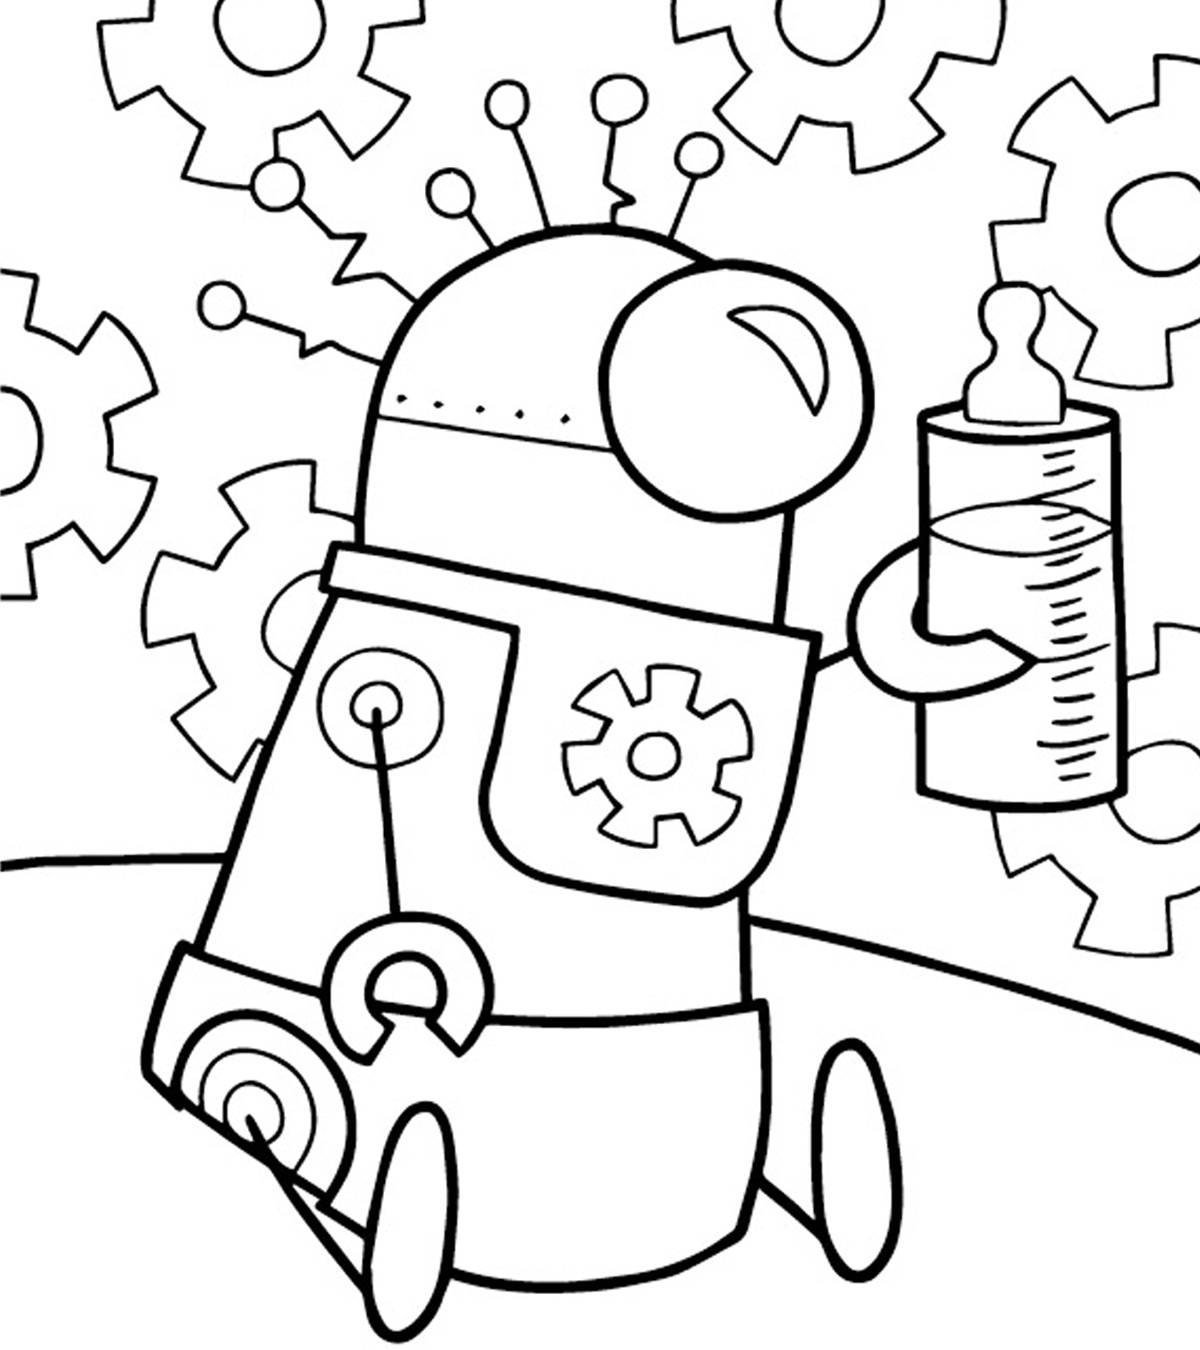 15 things you should do in roblox printable coloring pages